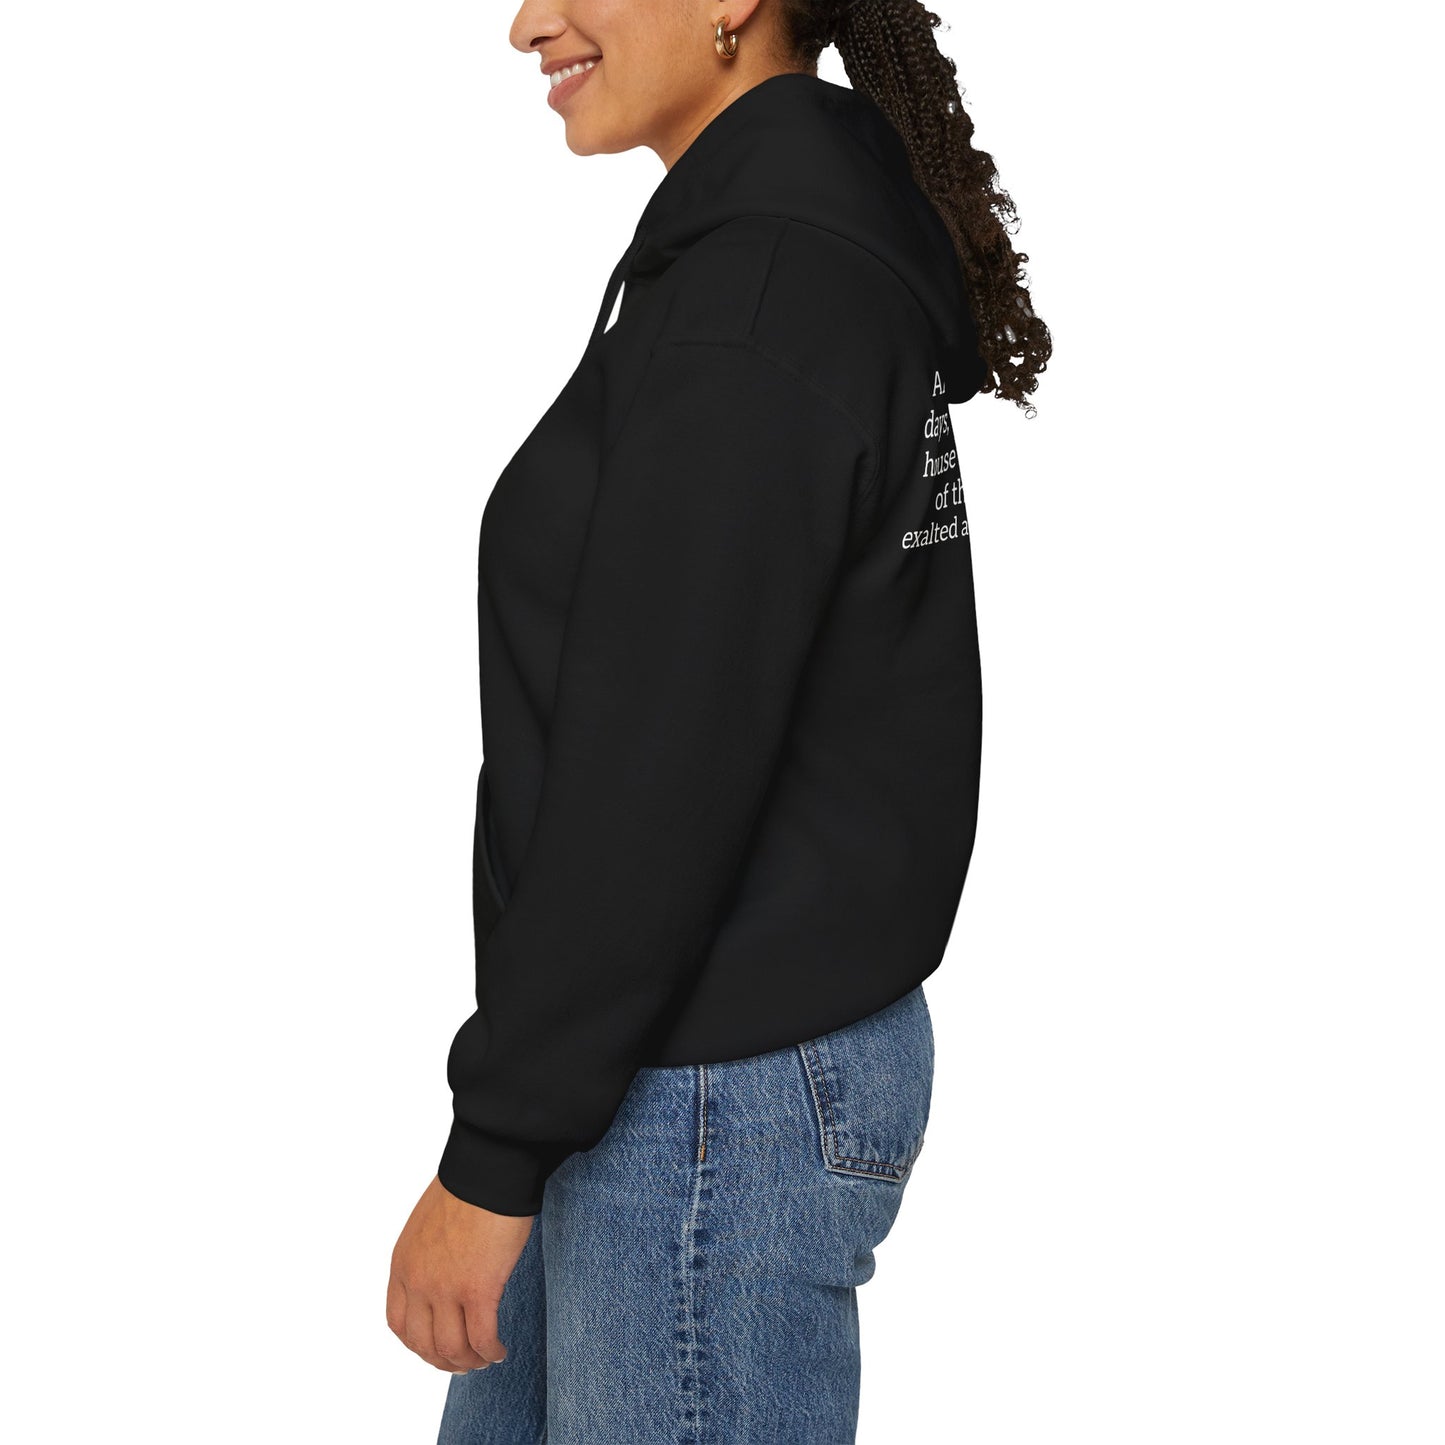 Mountain of the Lord's House Hoodie